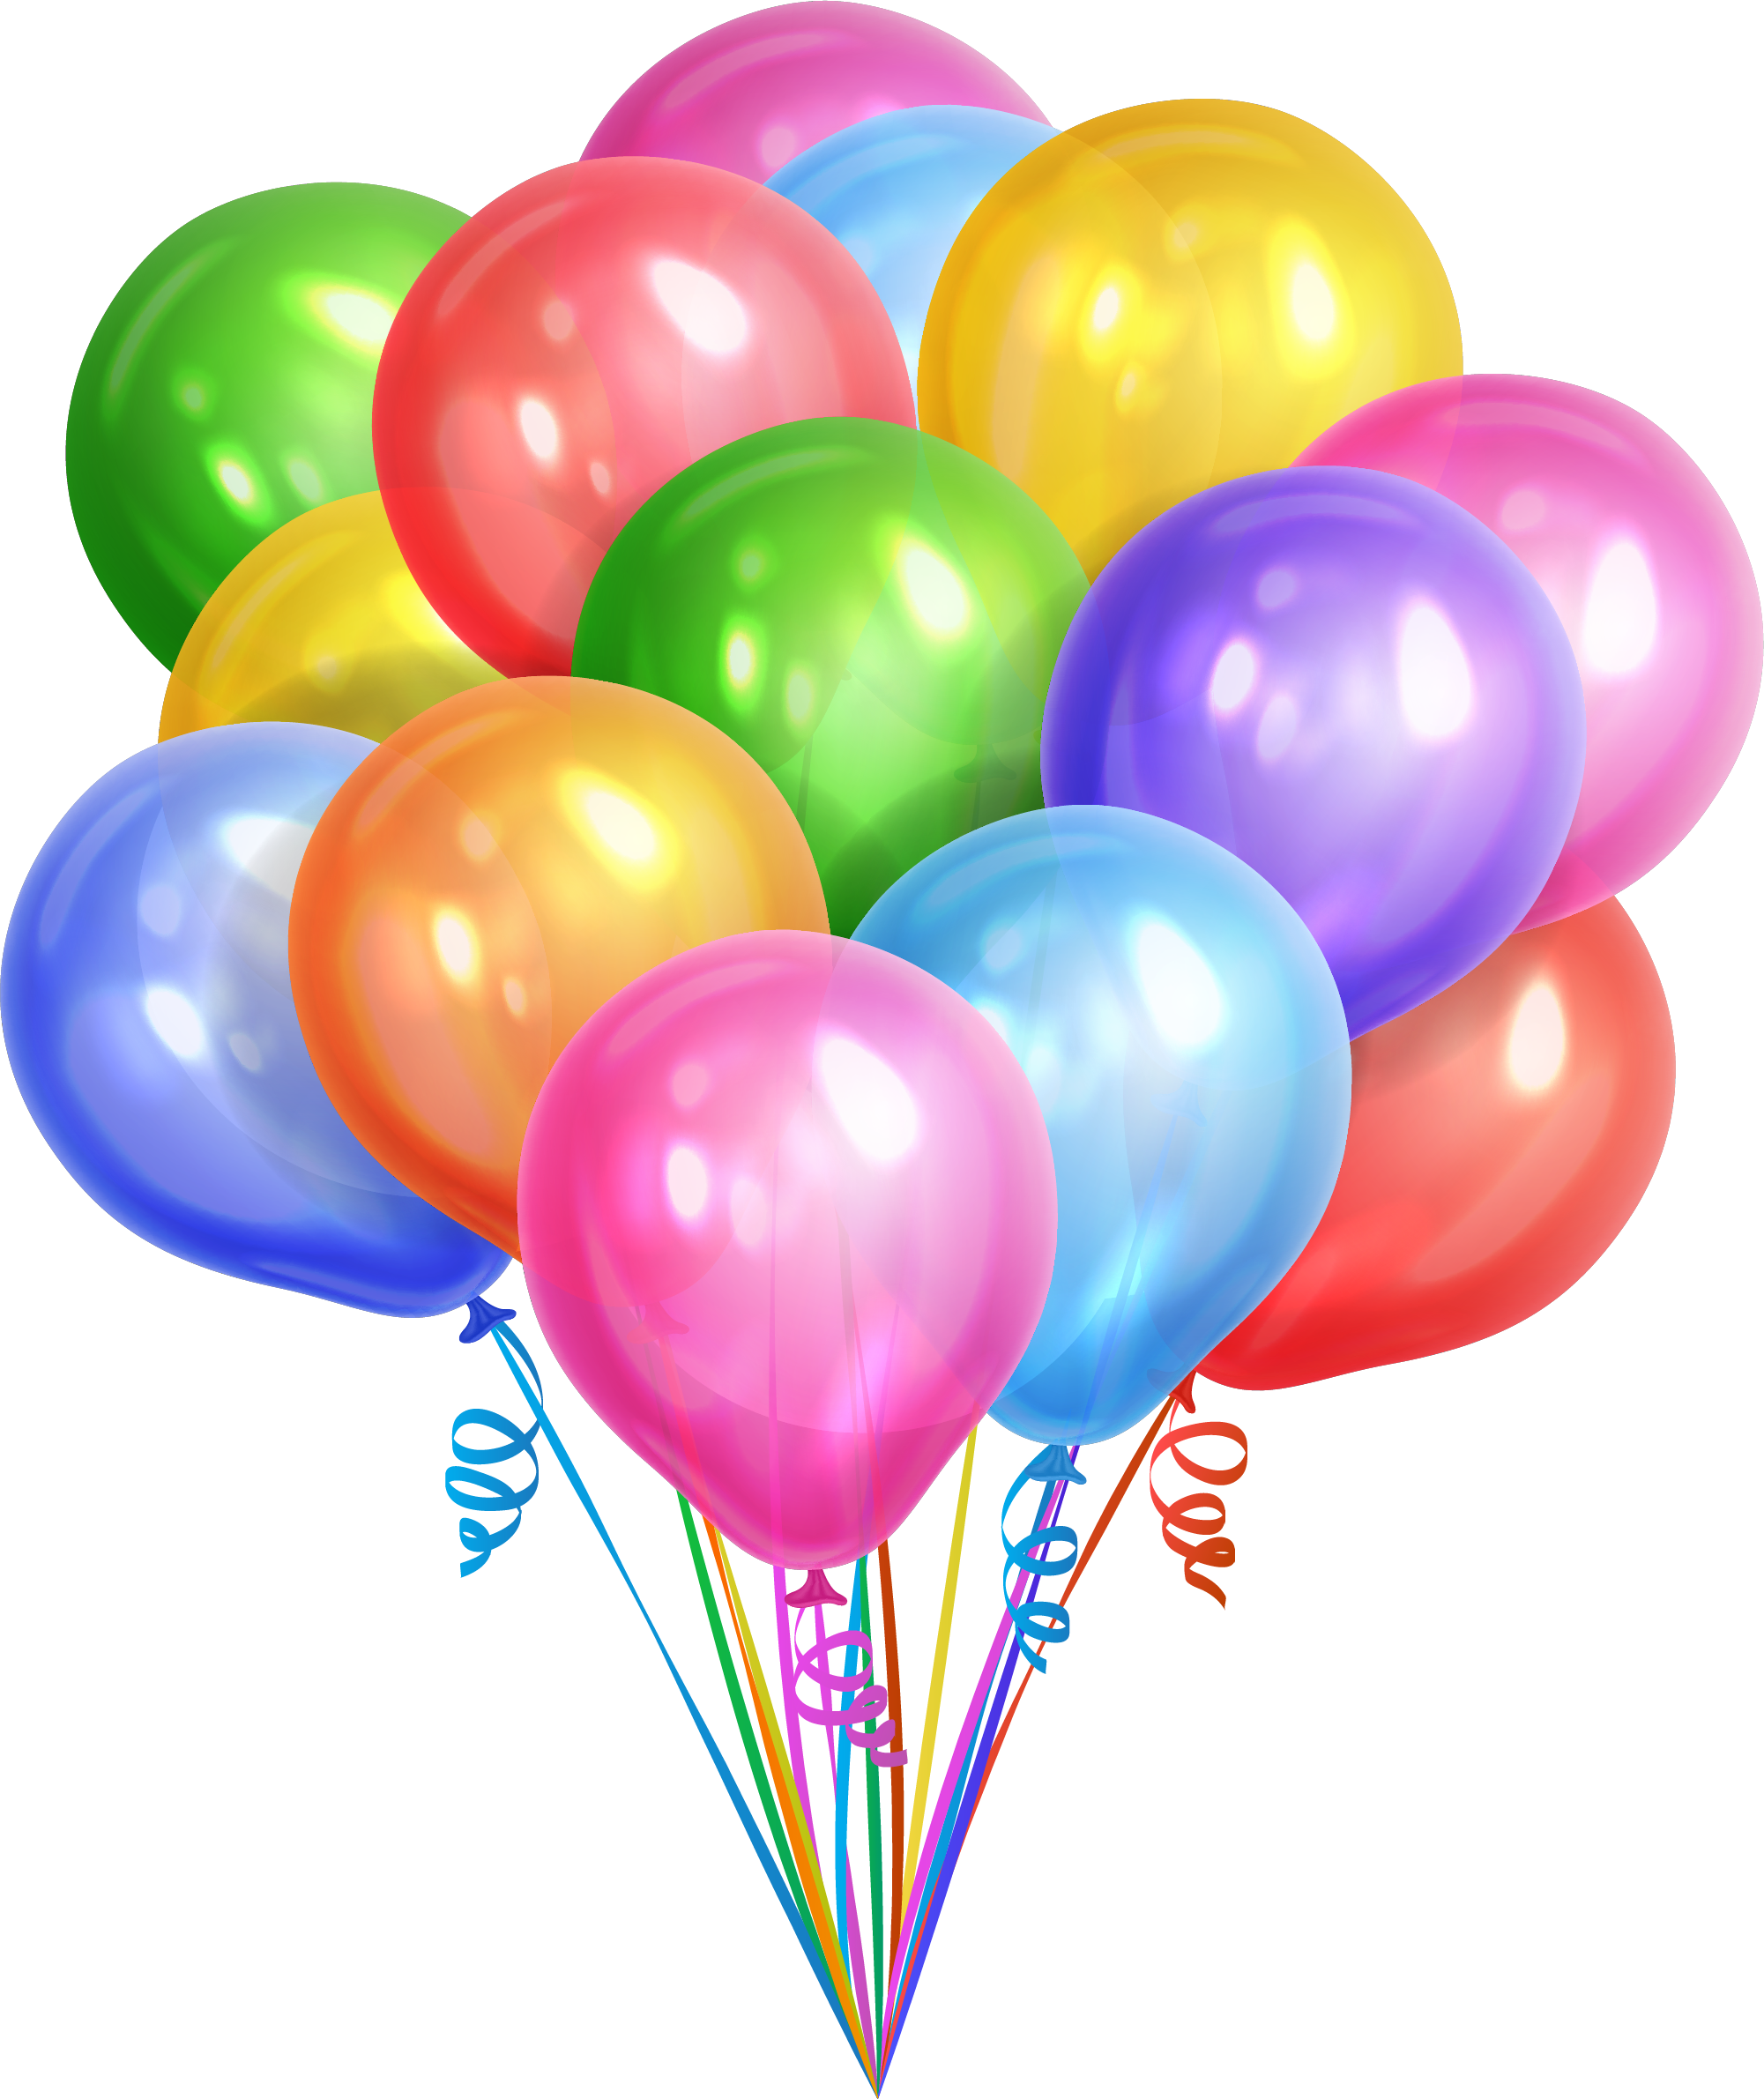 Balloons Dream Colorful Free Clipart HQ Clipart